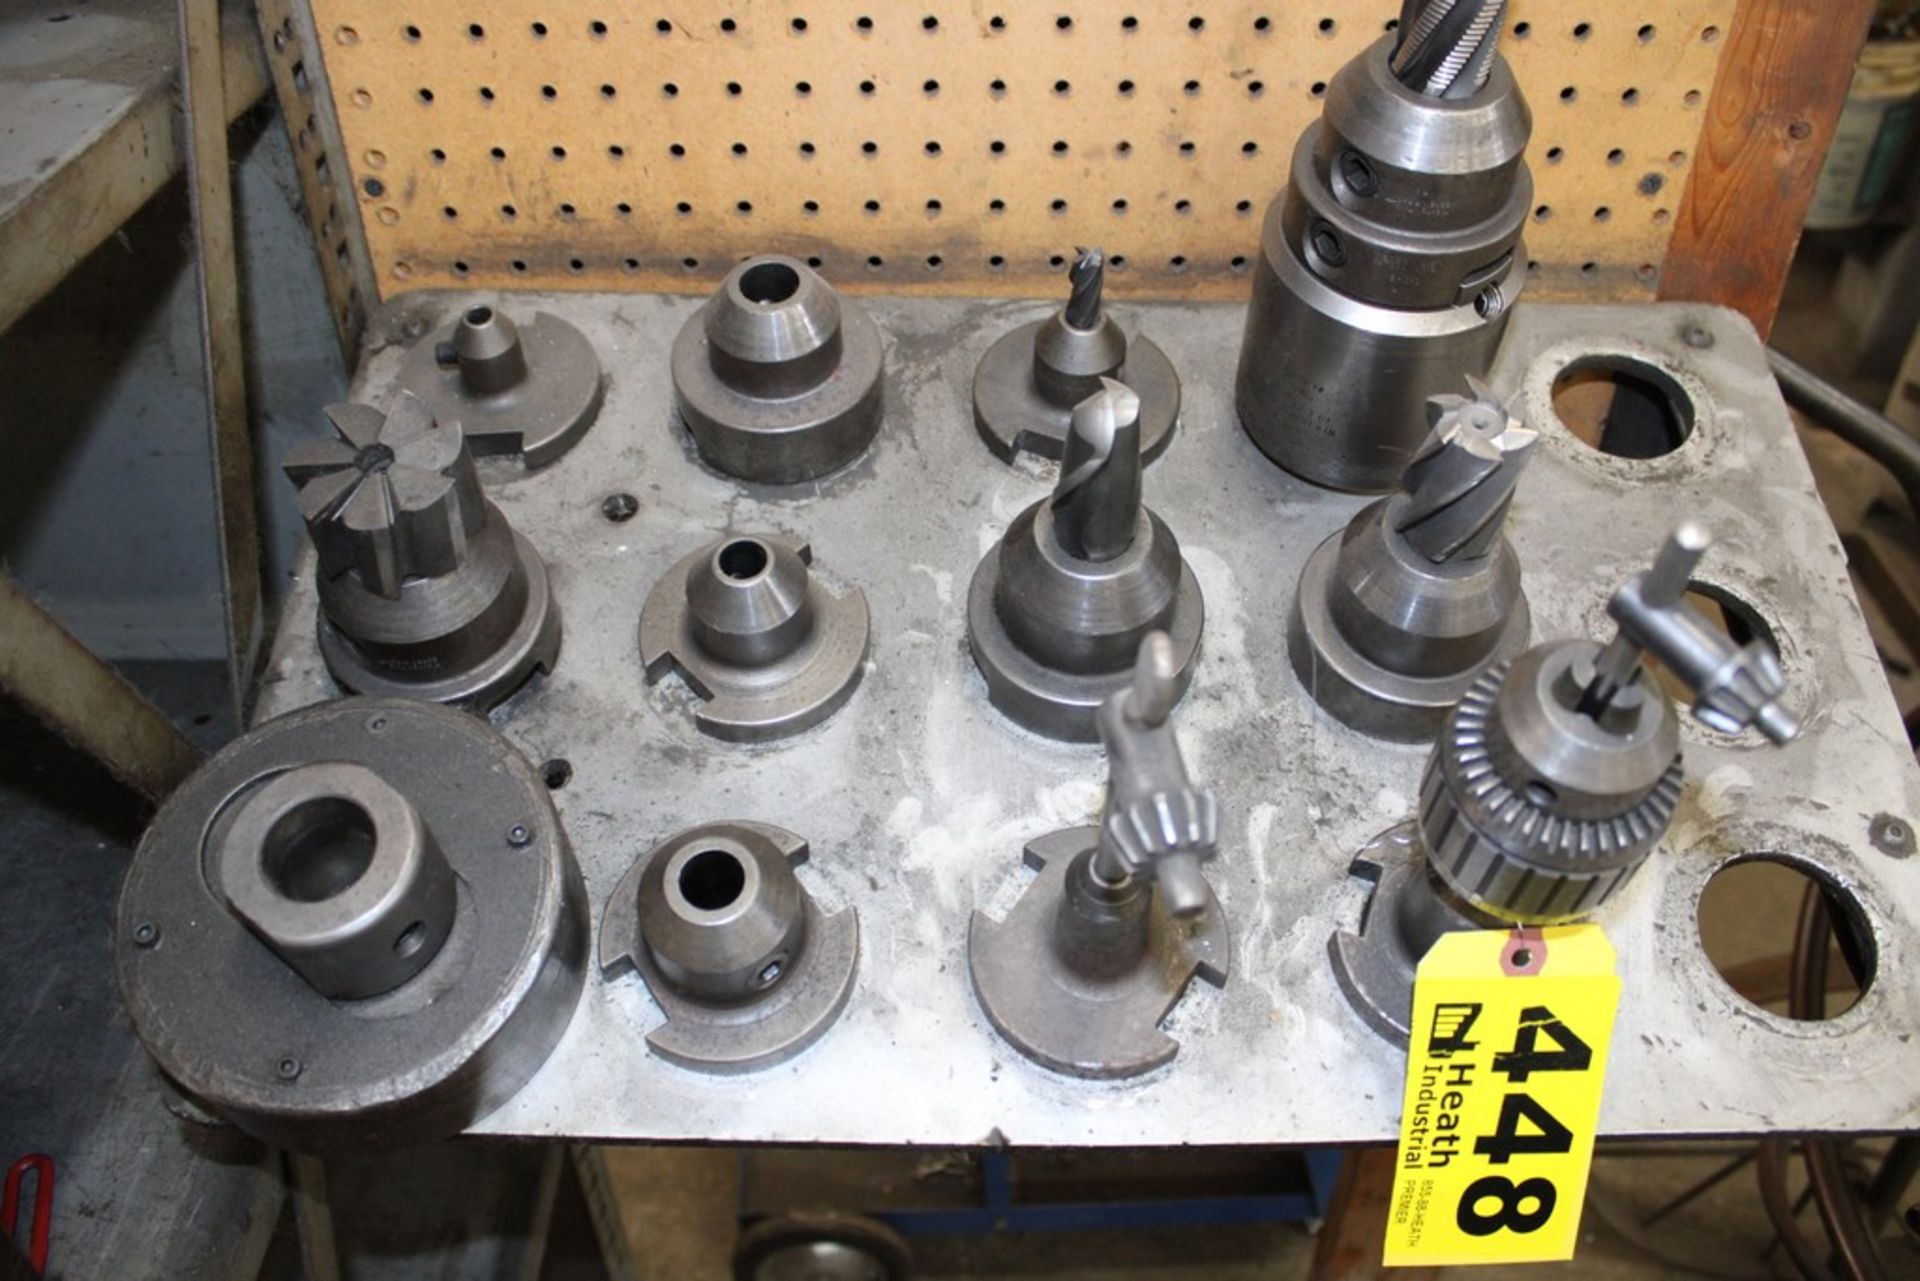 ASSORTED WELDON QH TAPER TOOL HOLDERS WITH RACK - Image 2 of 2